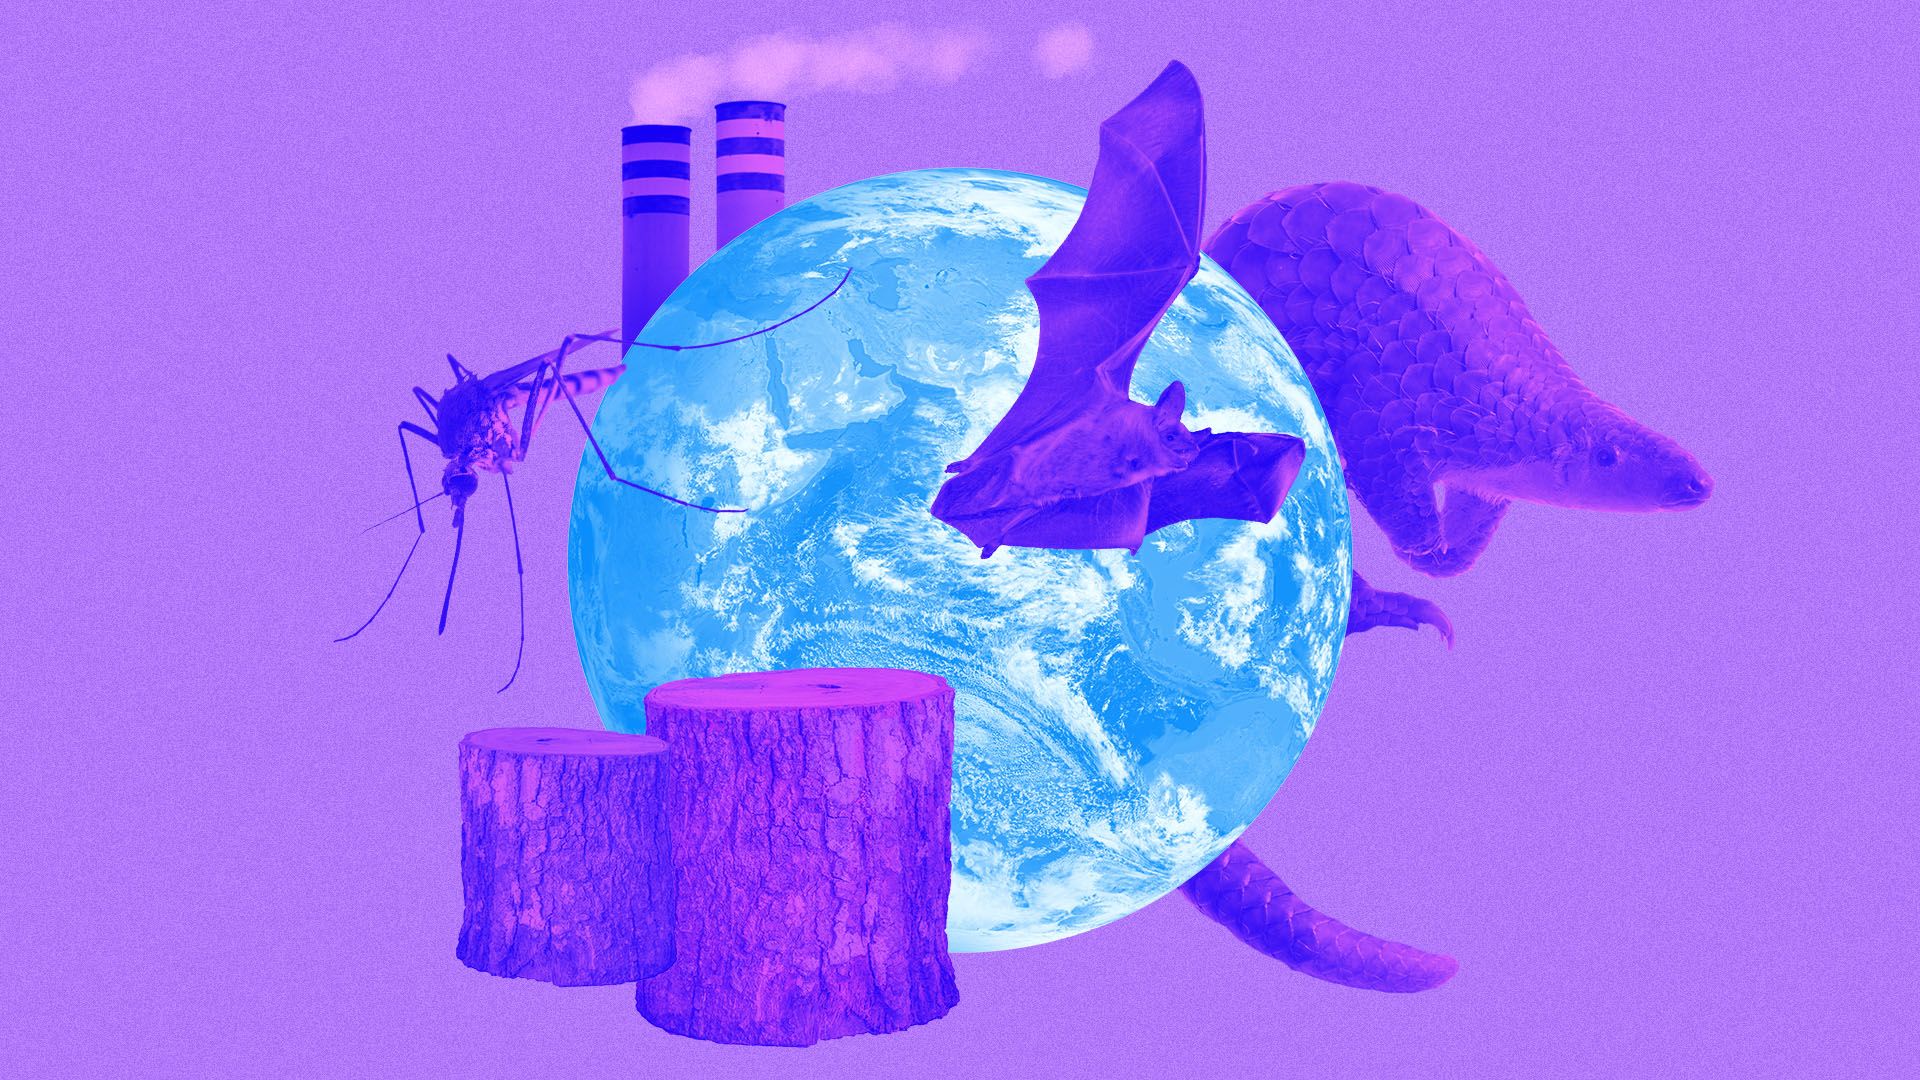 Illustrated collage of the earth surrounded by smoke stacks, a bat, a mosquito, a pangolin, and tree stumps